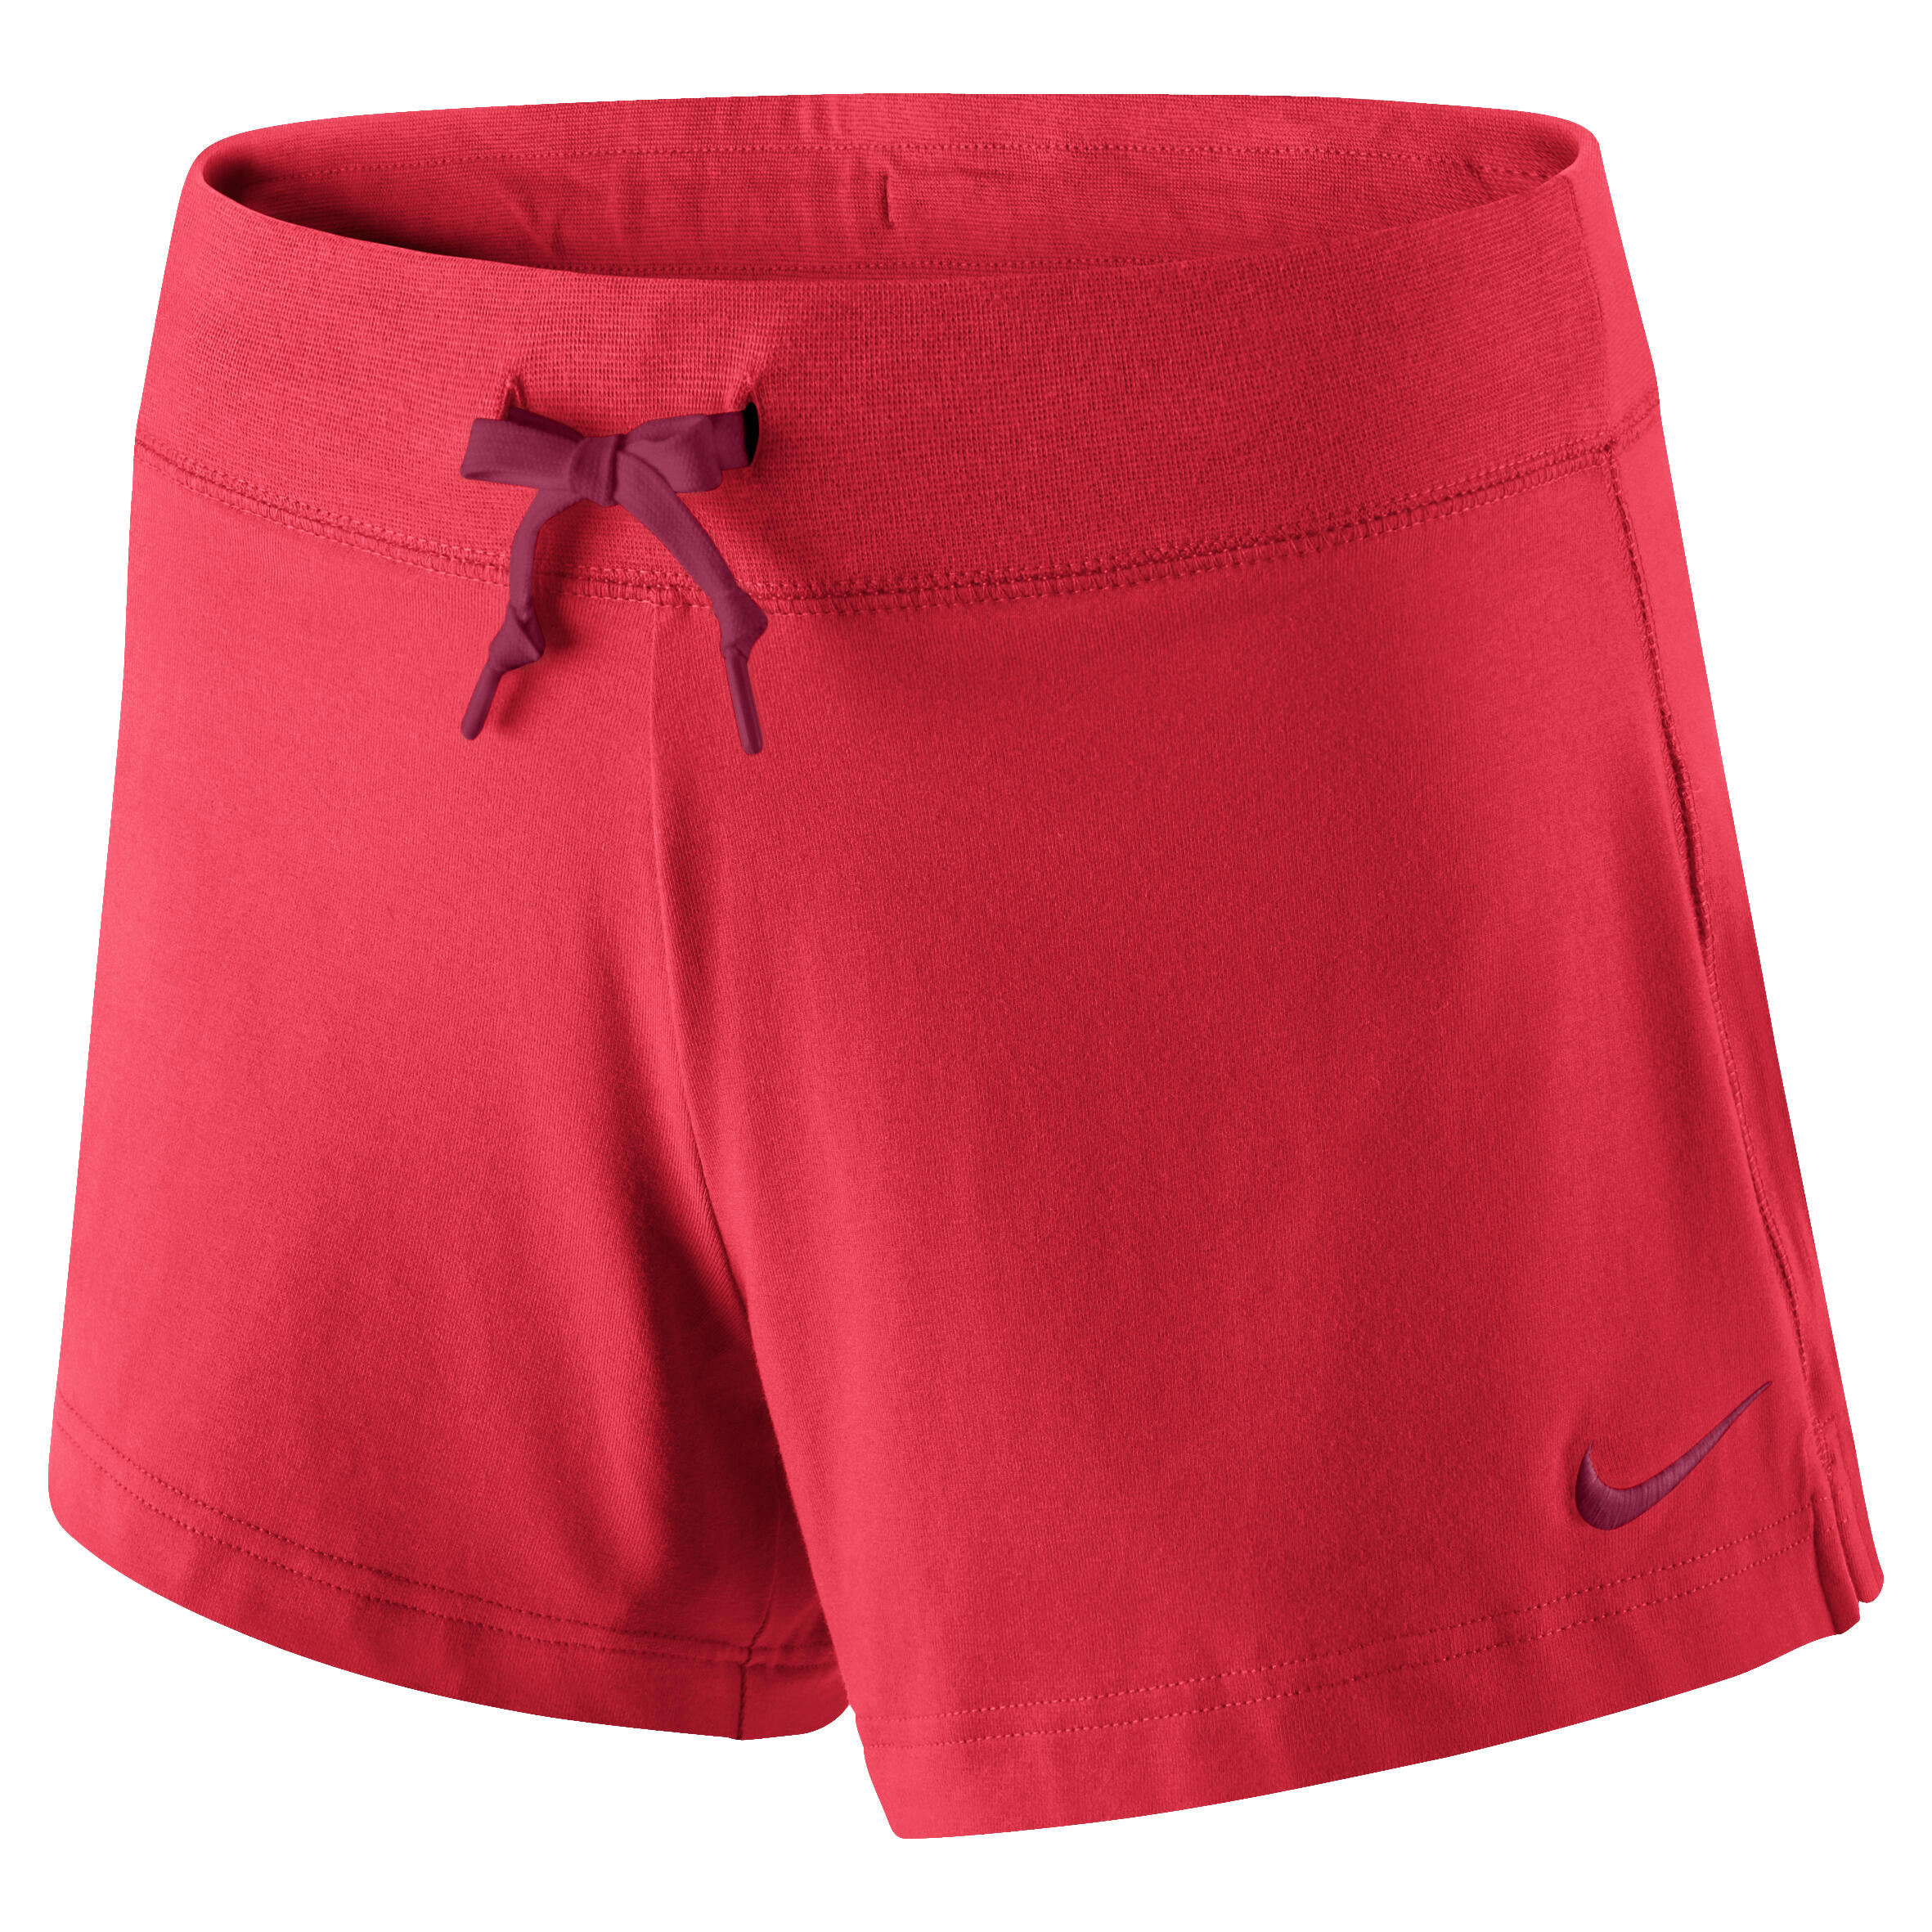 NIKE Women's Fitness Shorts - Red